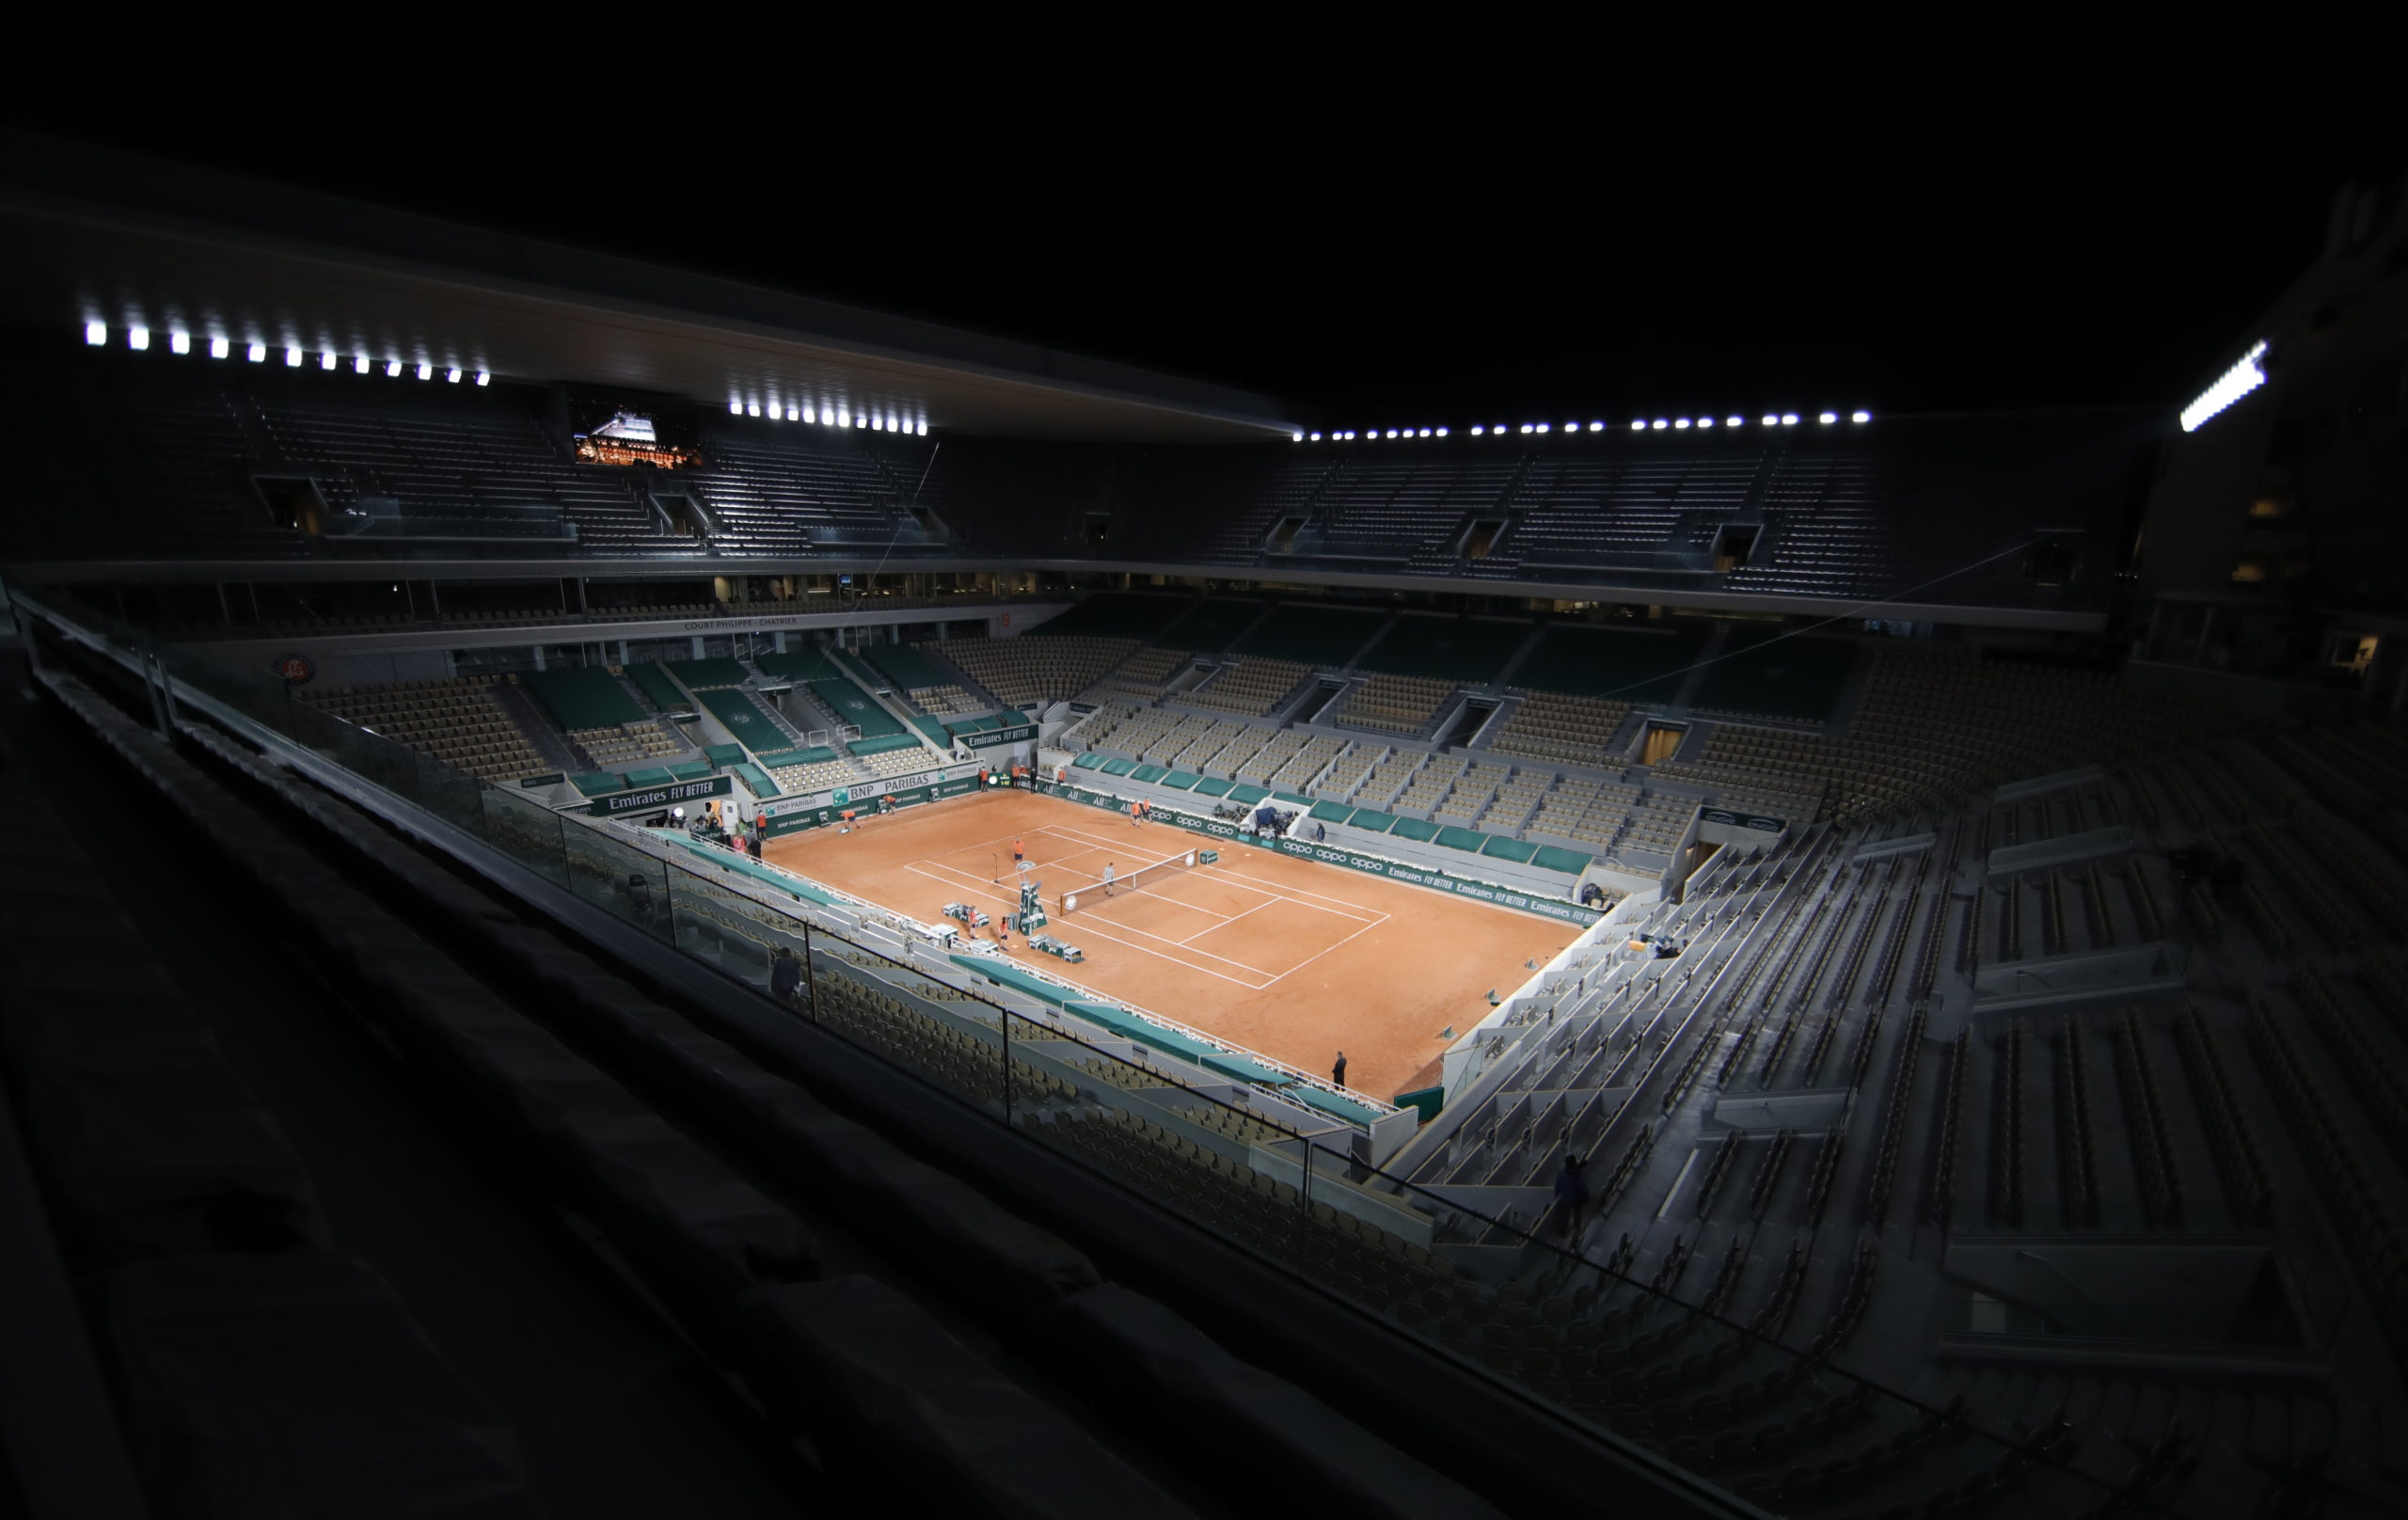 General view of the stadium after the first round match between Serena Williams of the U.S. and Romania's Irina-Camelia Begu